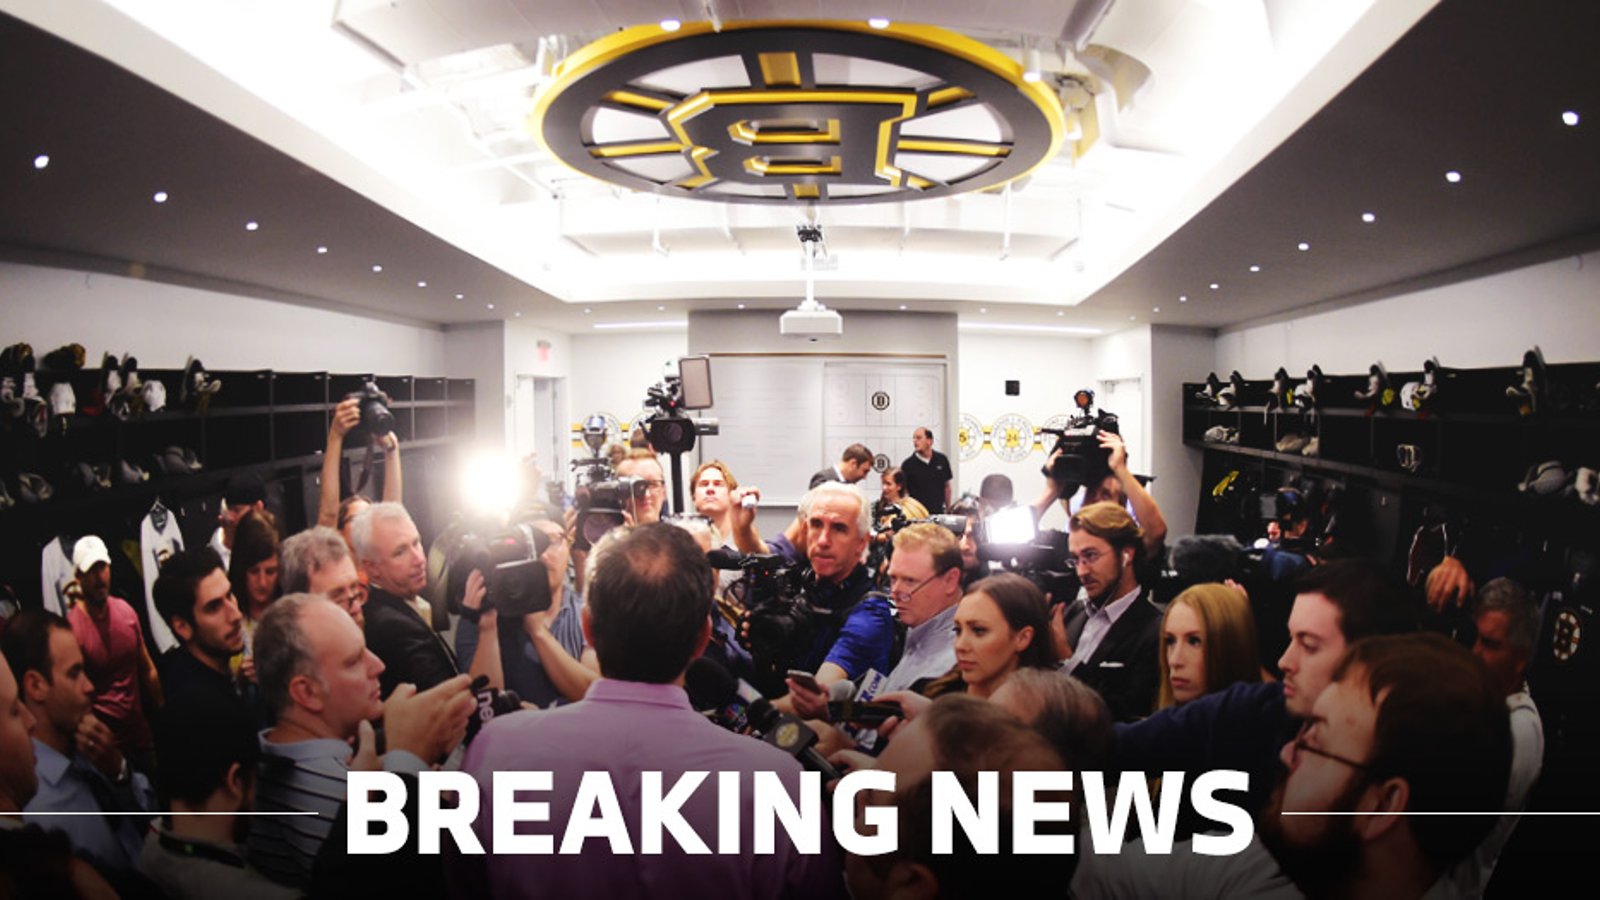 BREAKING: The Boston Bruins have named their 28th Head Coach.